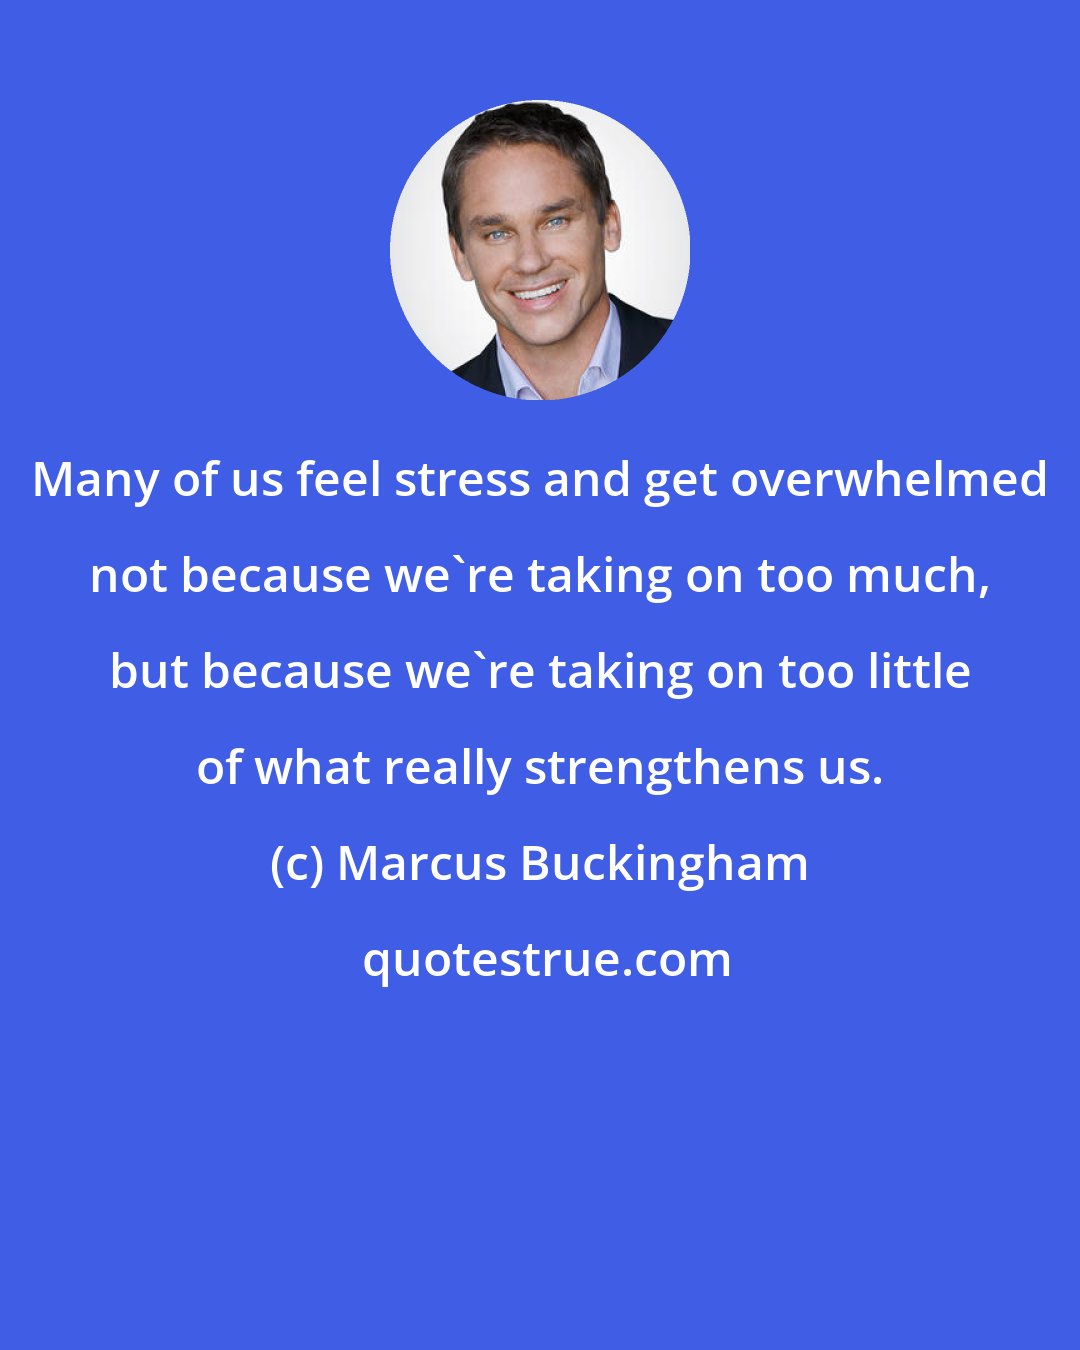 Marcus Buckingham: Many of us feel stress and get overwhelmed not because we're taking on too much, but because we're taking on too little of what really strengthens us.